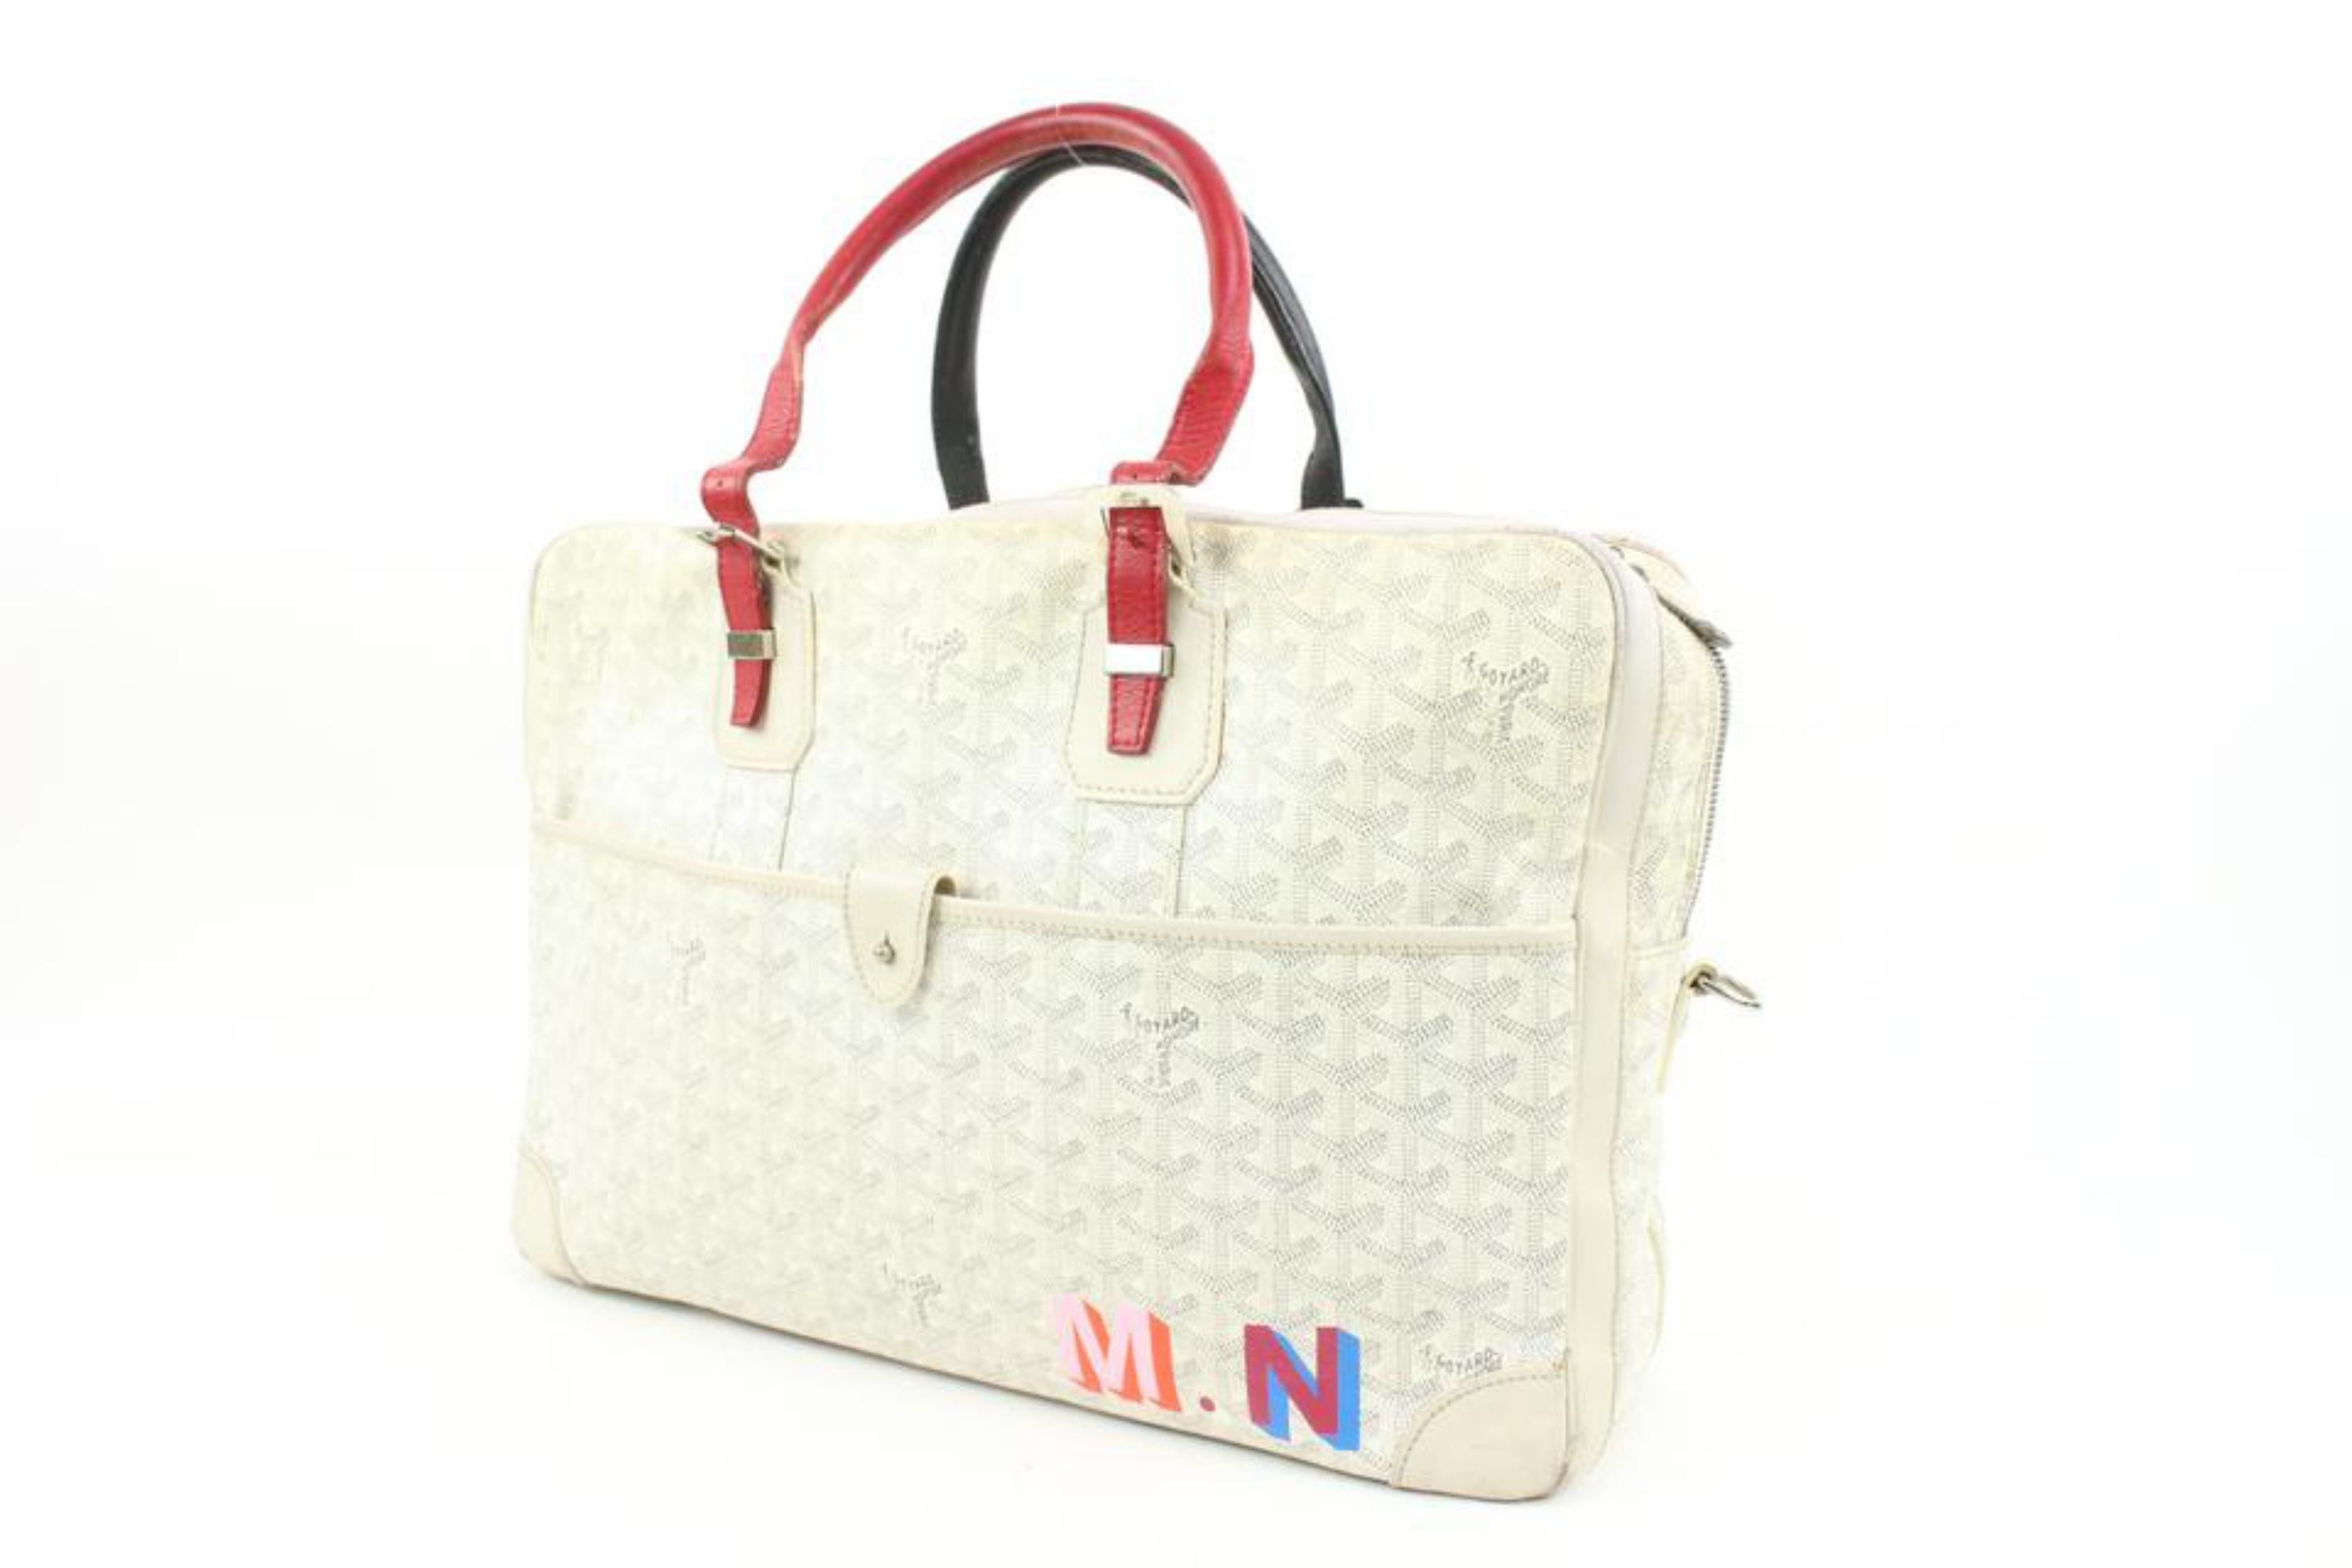 Goyard White Chevron Ambassade MM Briefcase Business Bag 12gy222s
Date Code/Serial Number: ABA020076
Made In: France
Measurements: Length:  16